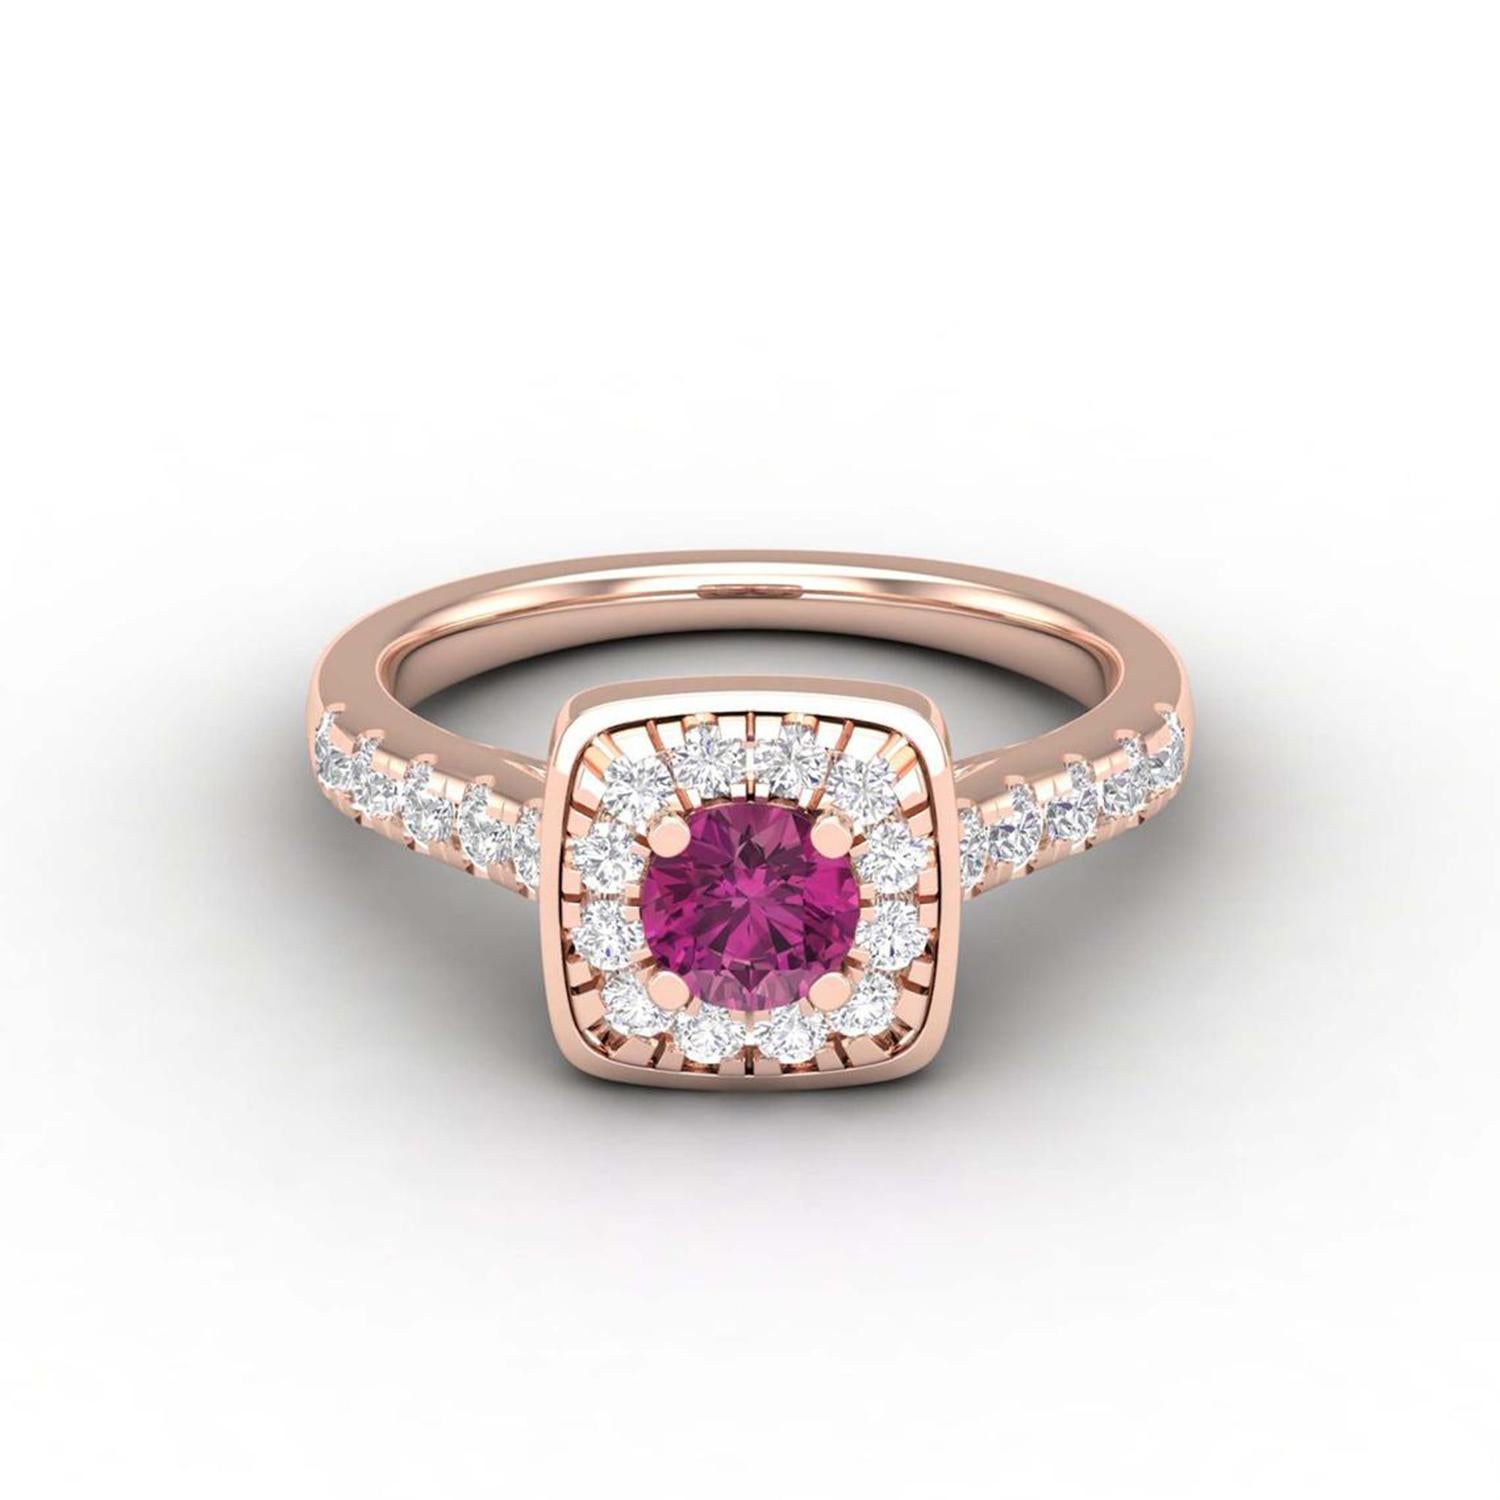 14 K Gold Rubellite Tourmaline Ring / Diamond Ring / Solitaire Ring For Sale 1